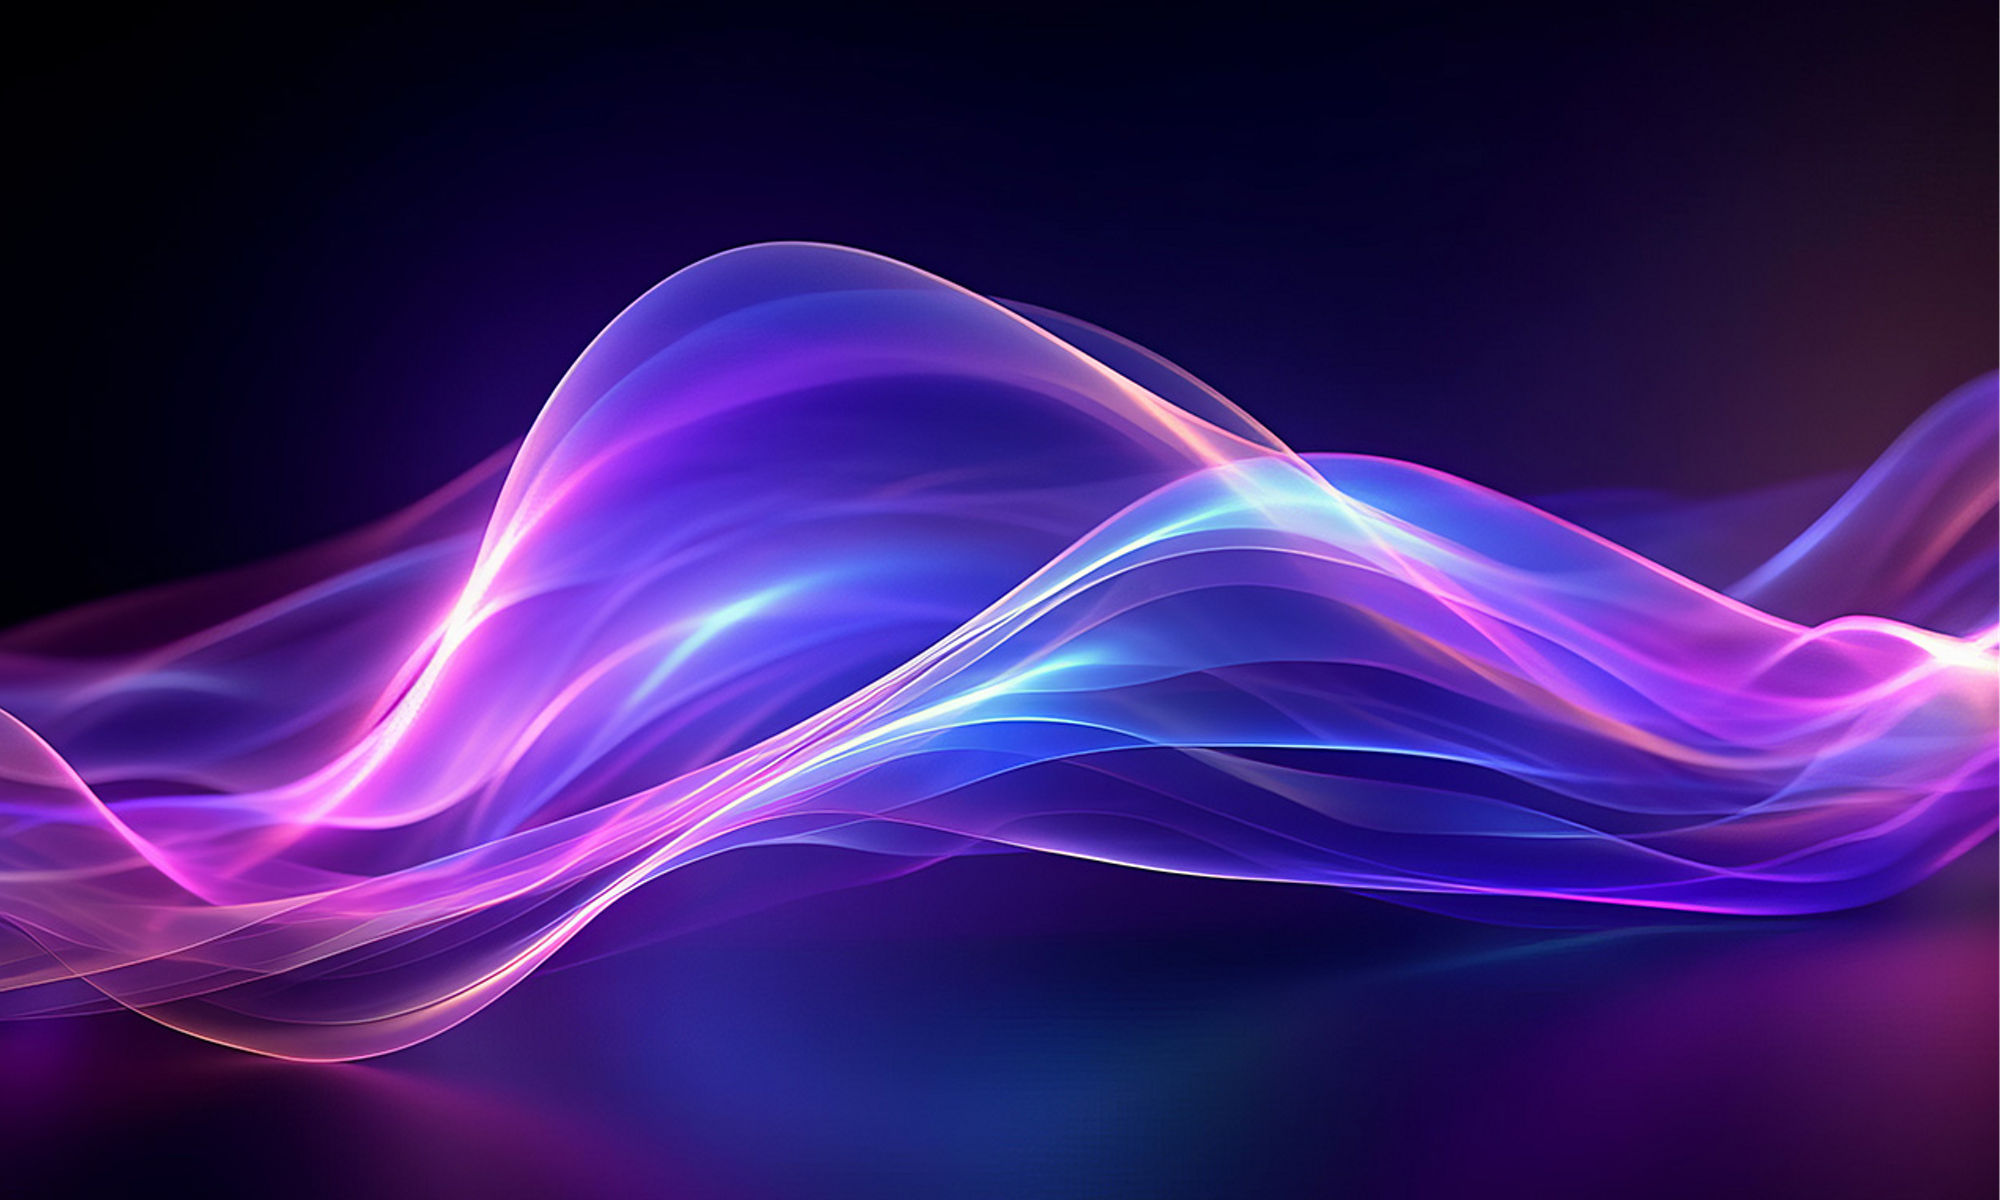 Waves of blue, purple and magenta transluscent colors on a black background